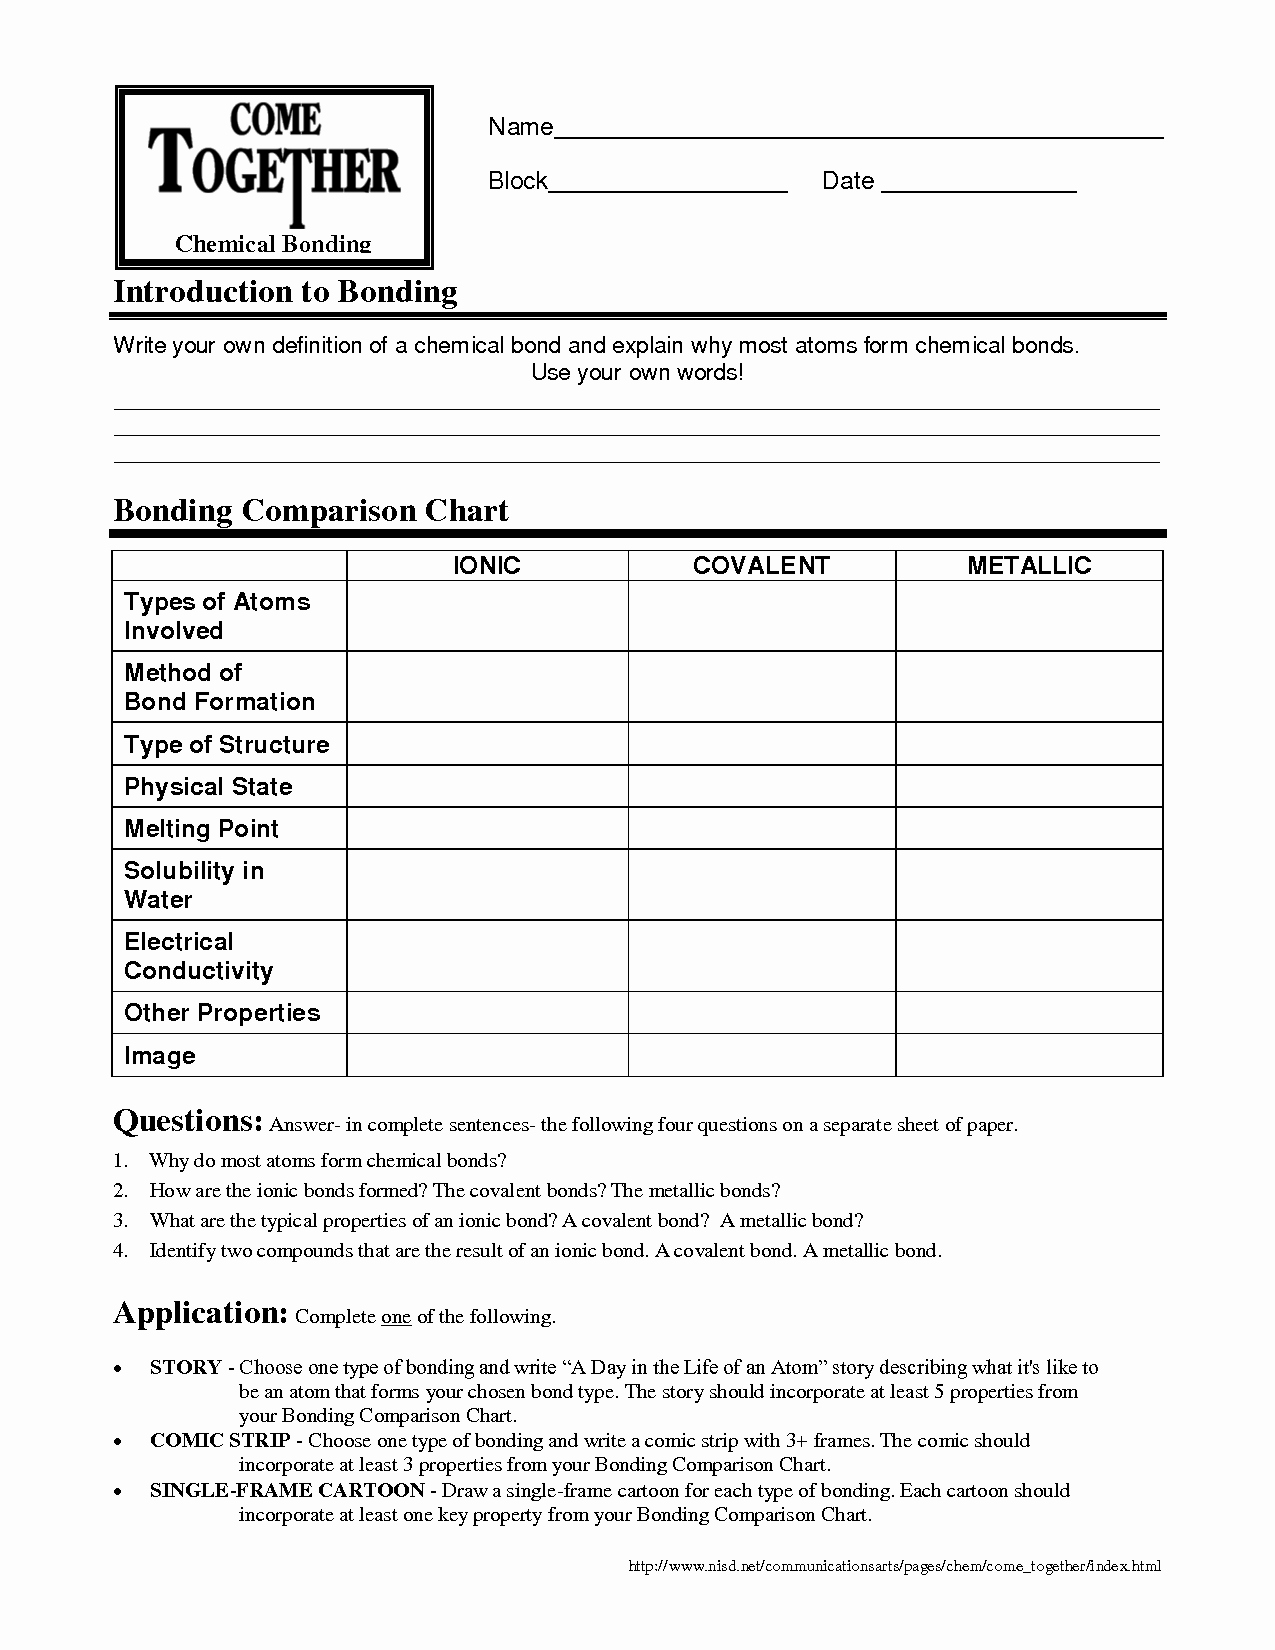 Ionic and Covalent Bonds Worksheet Luxury 16 Best Of Types Chemical Bonds Worksheet